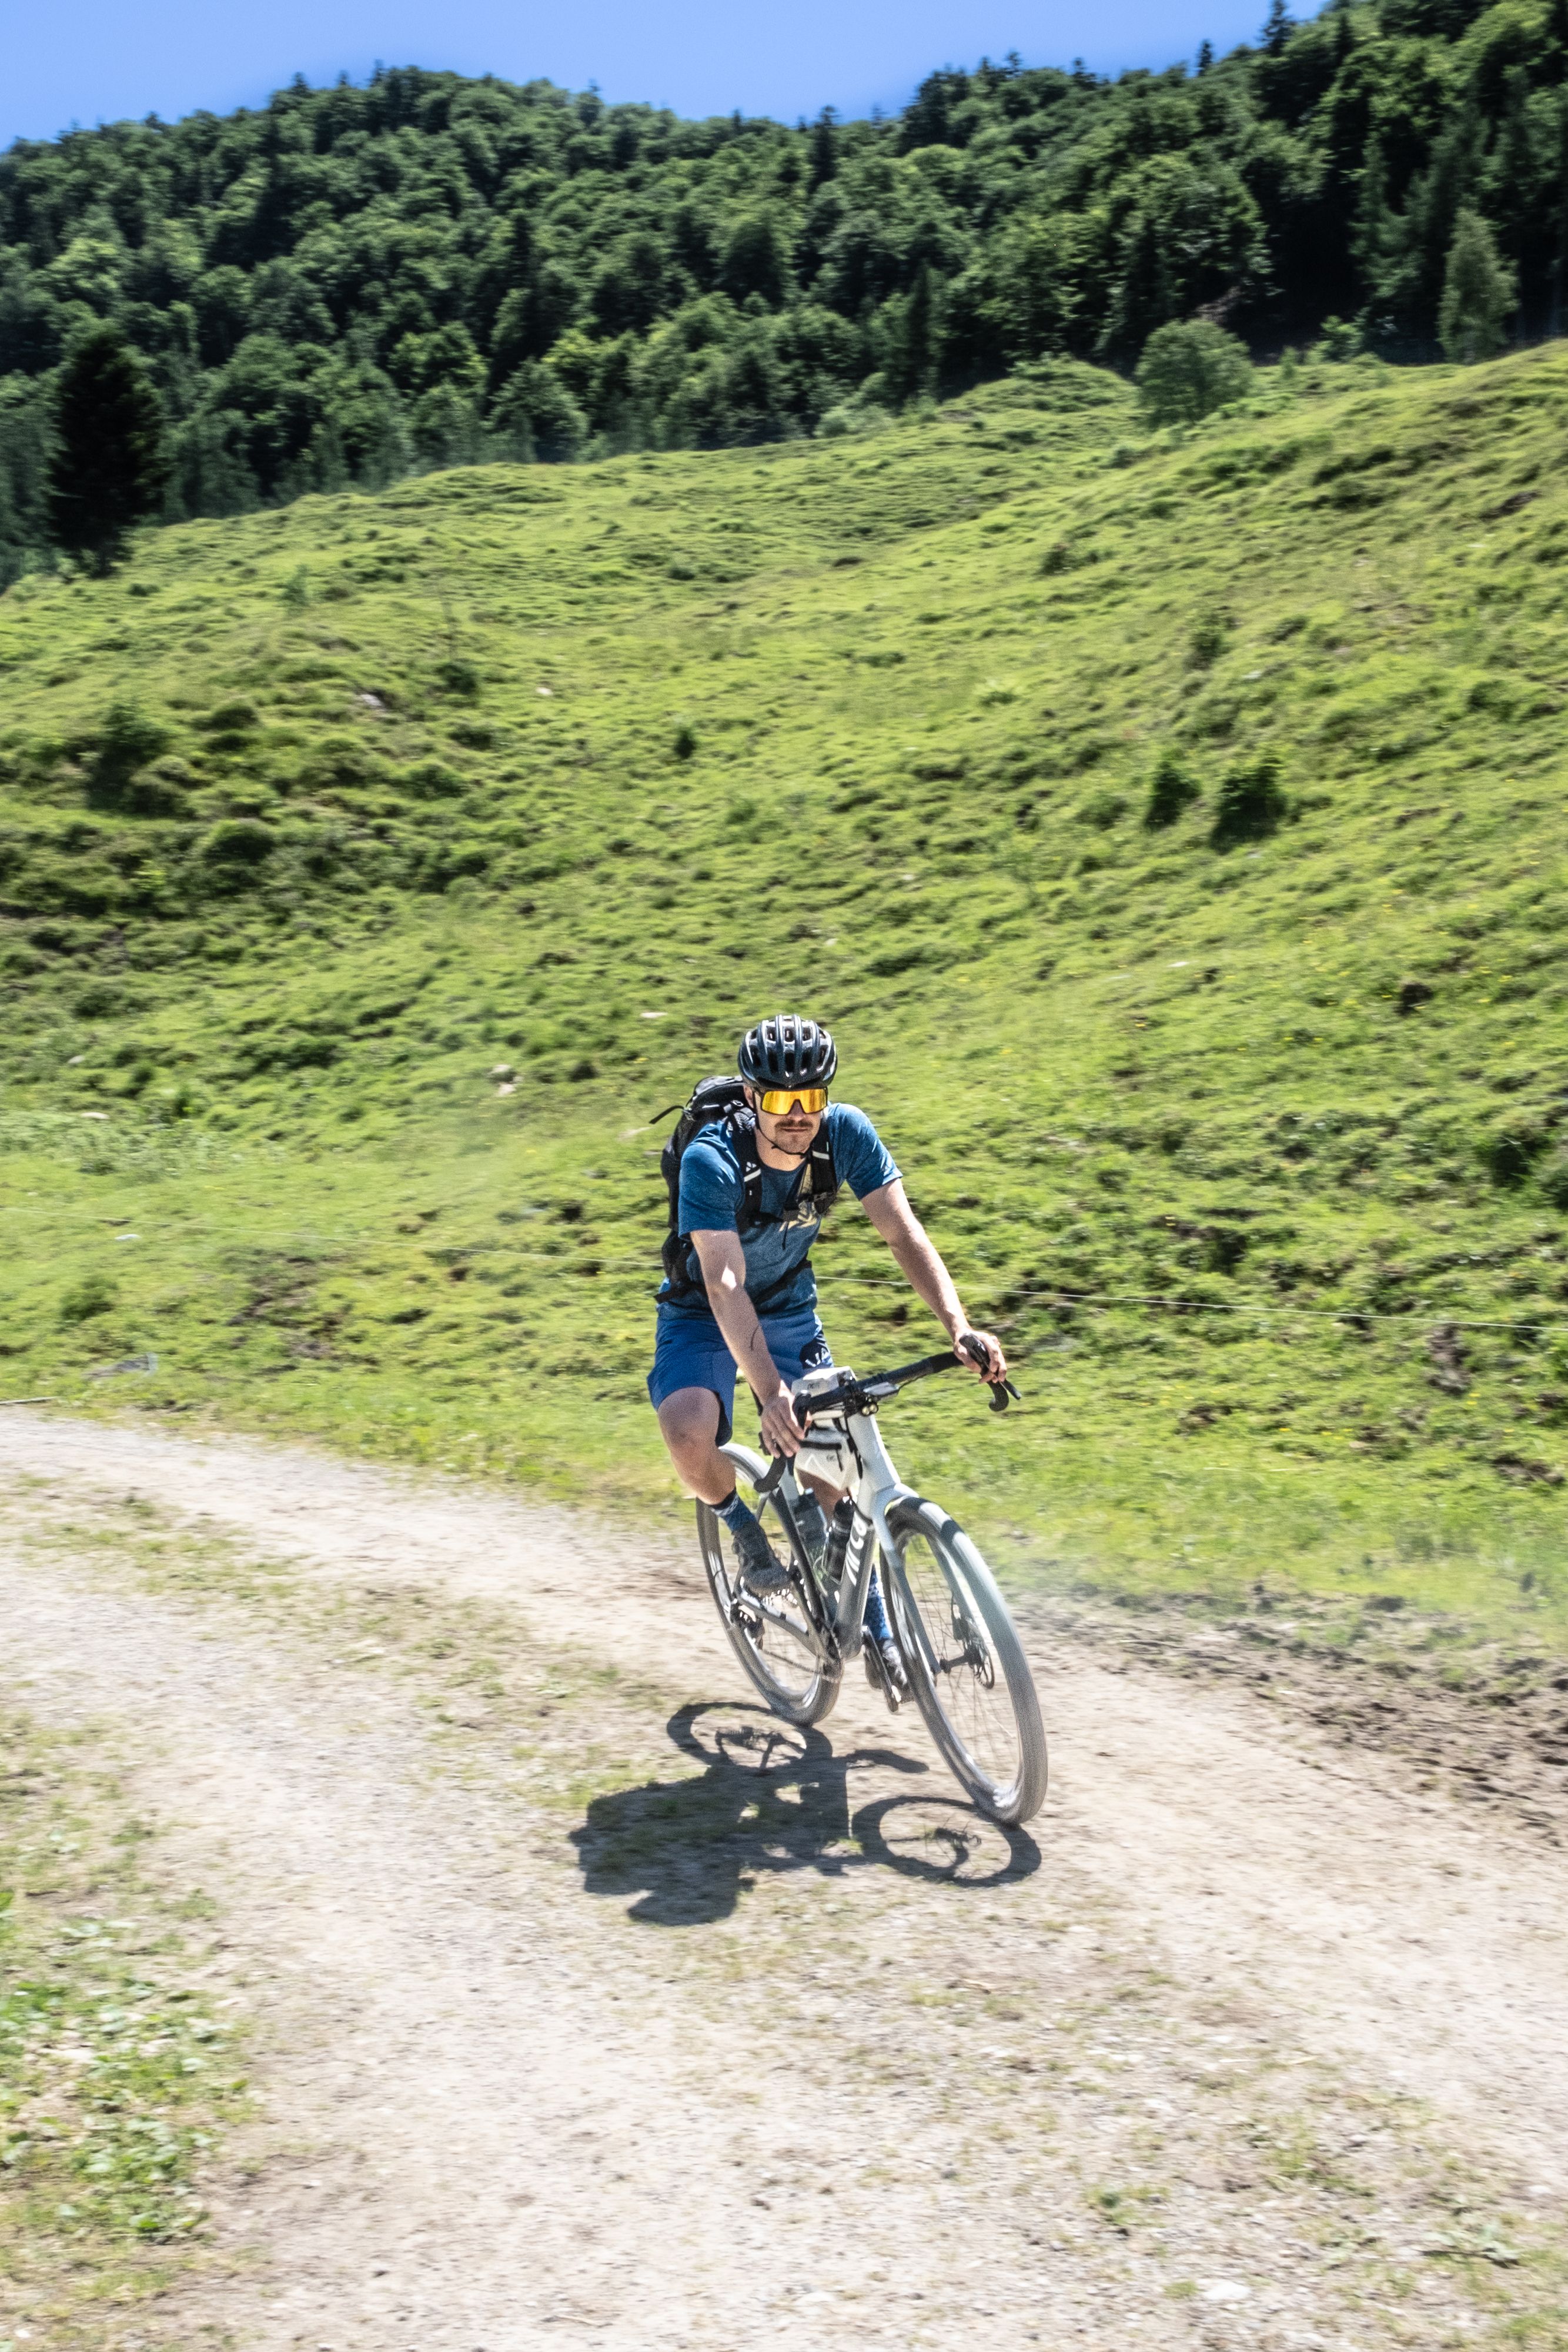 The climbs in the Kitzbühel Alps are steep, but fit Gravelbikers will love them!